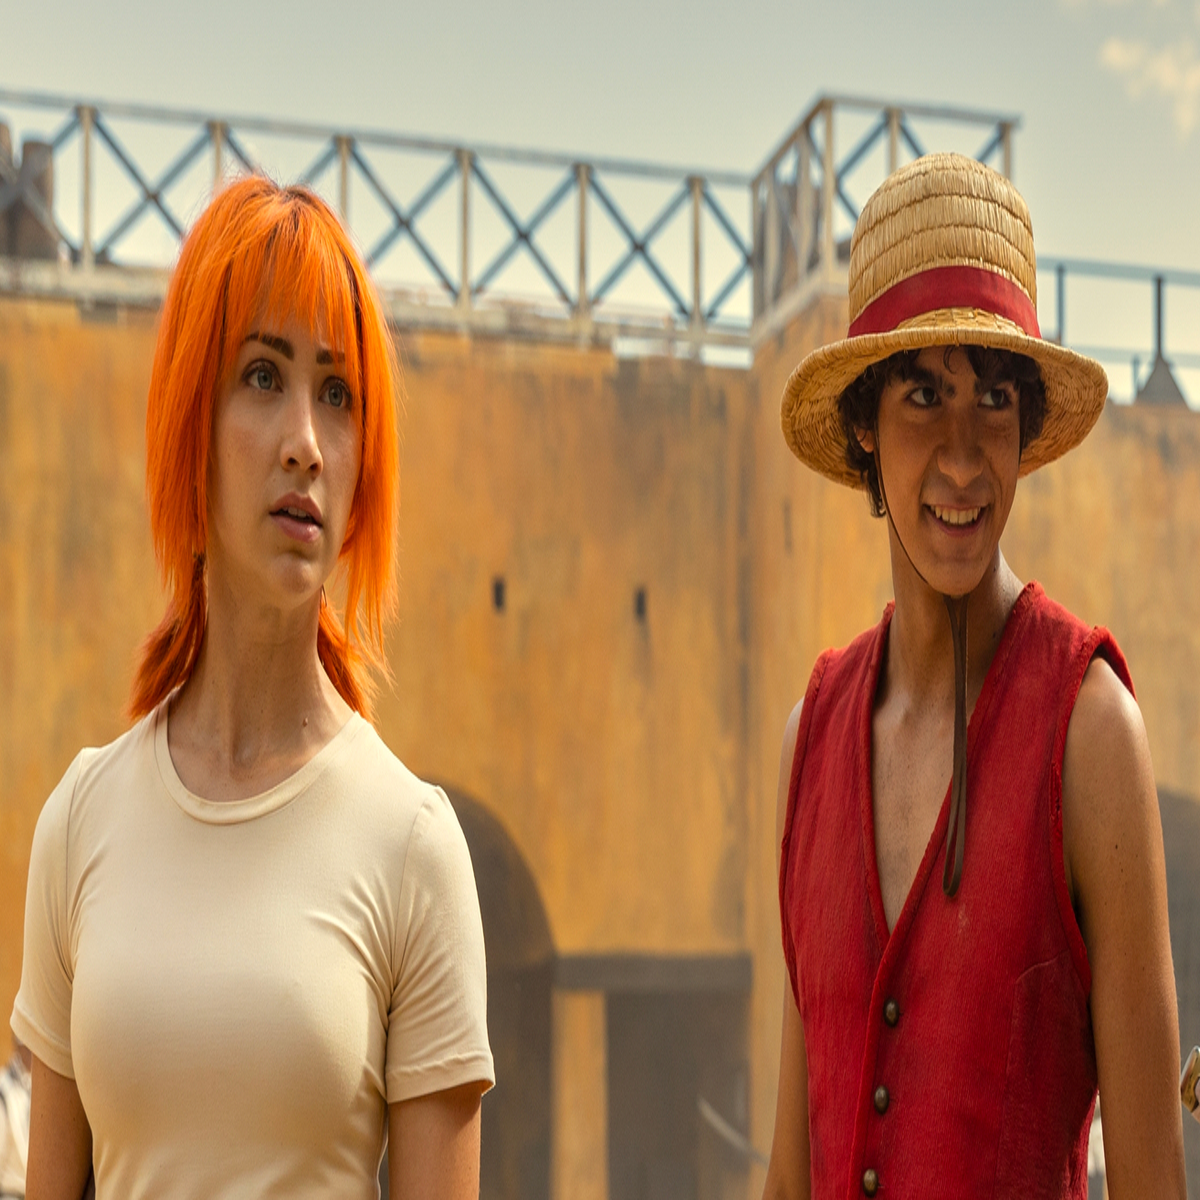 One Piece' Live Action Review, Season 1, Episode 6